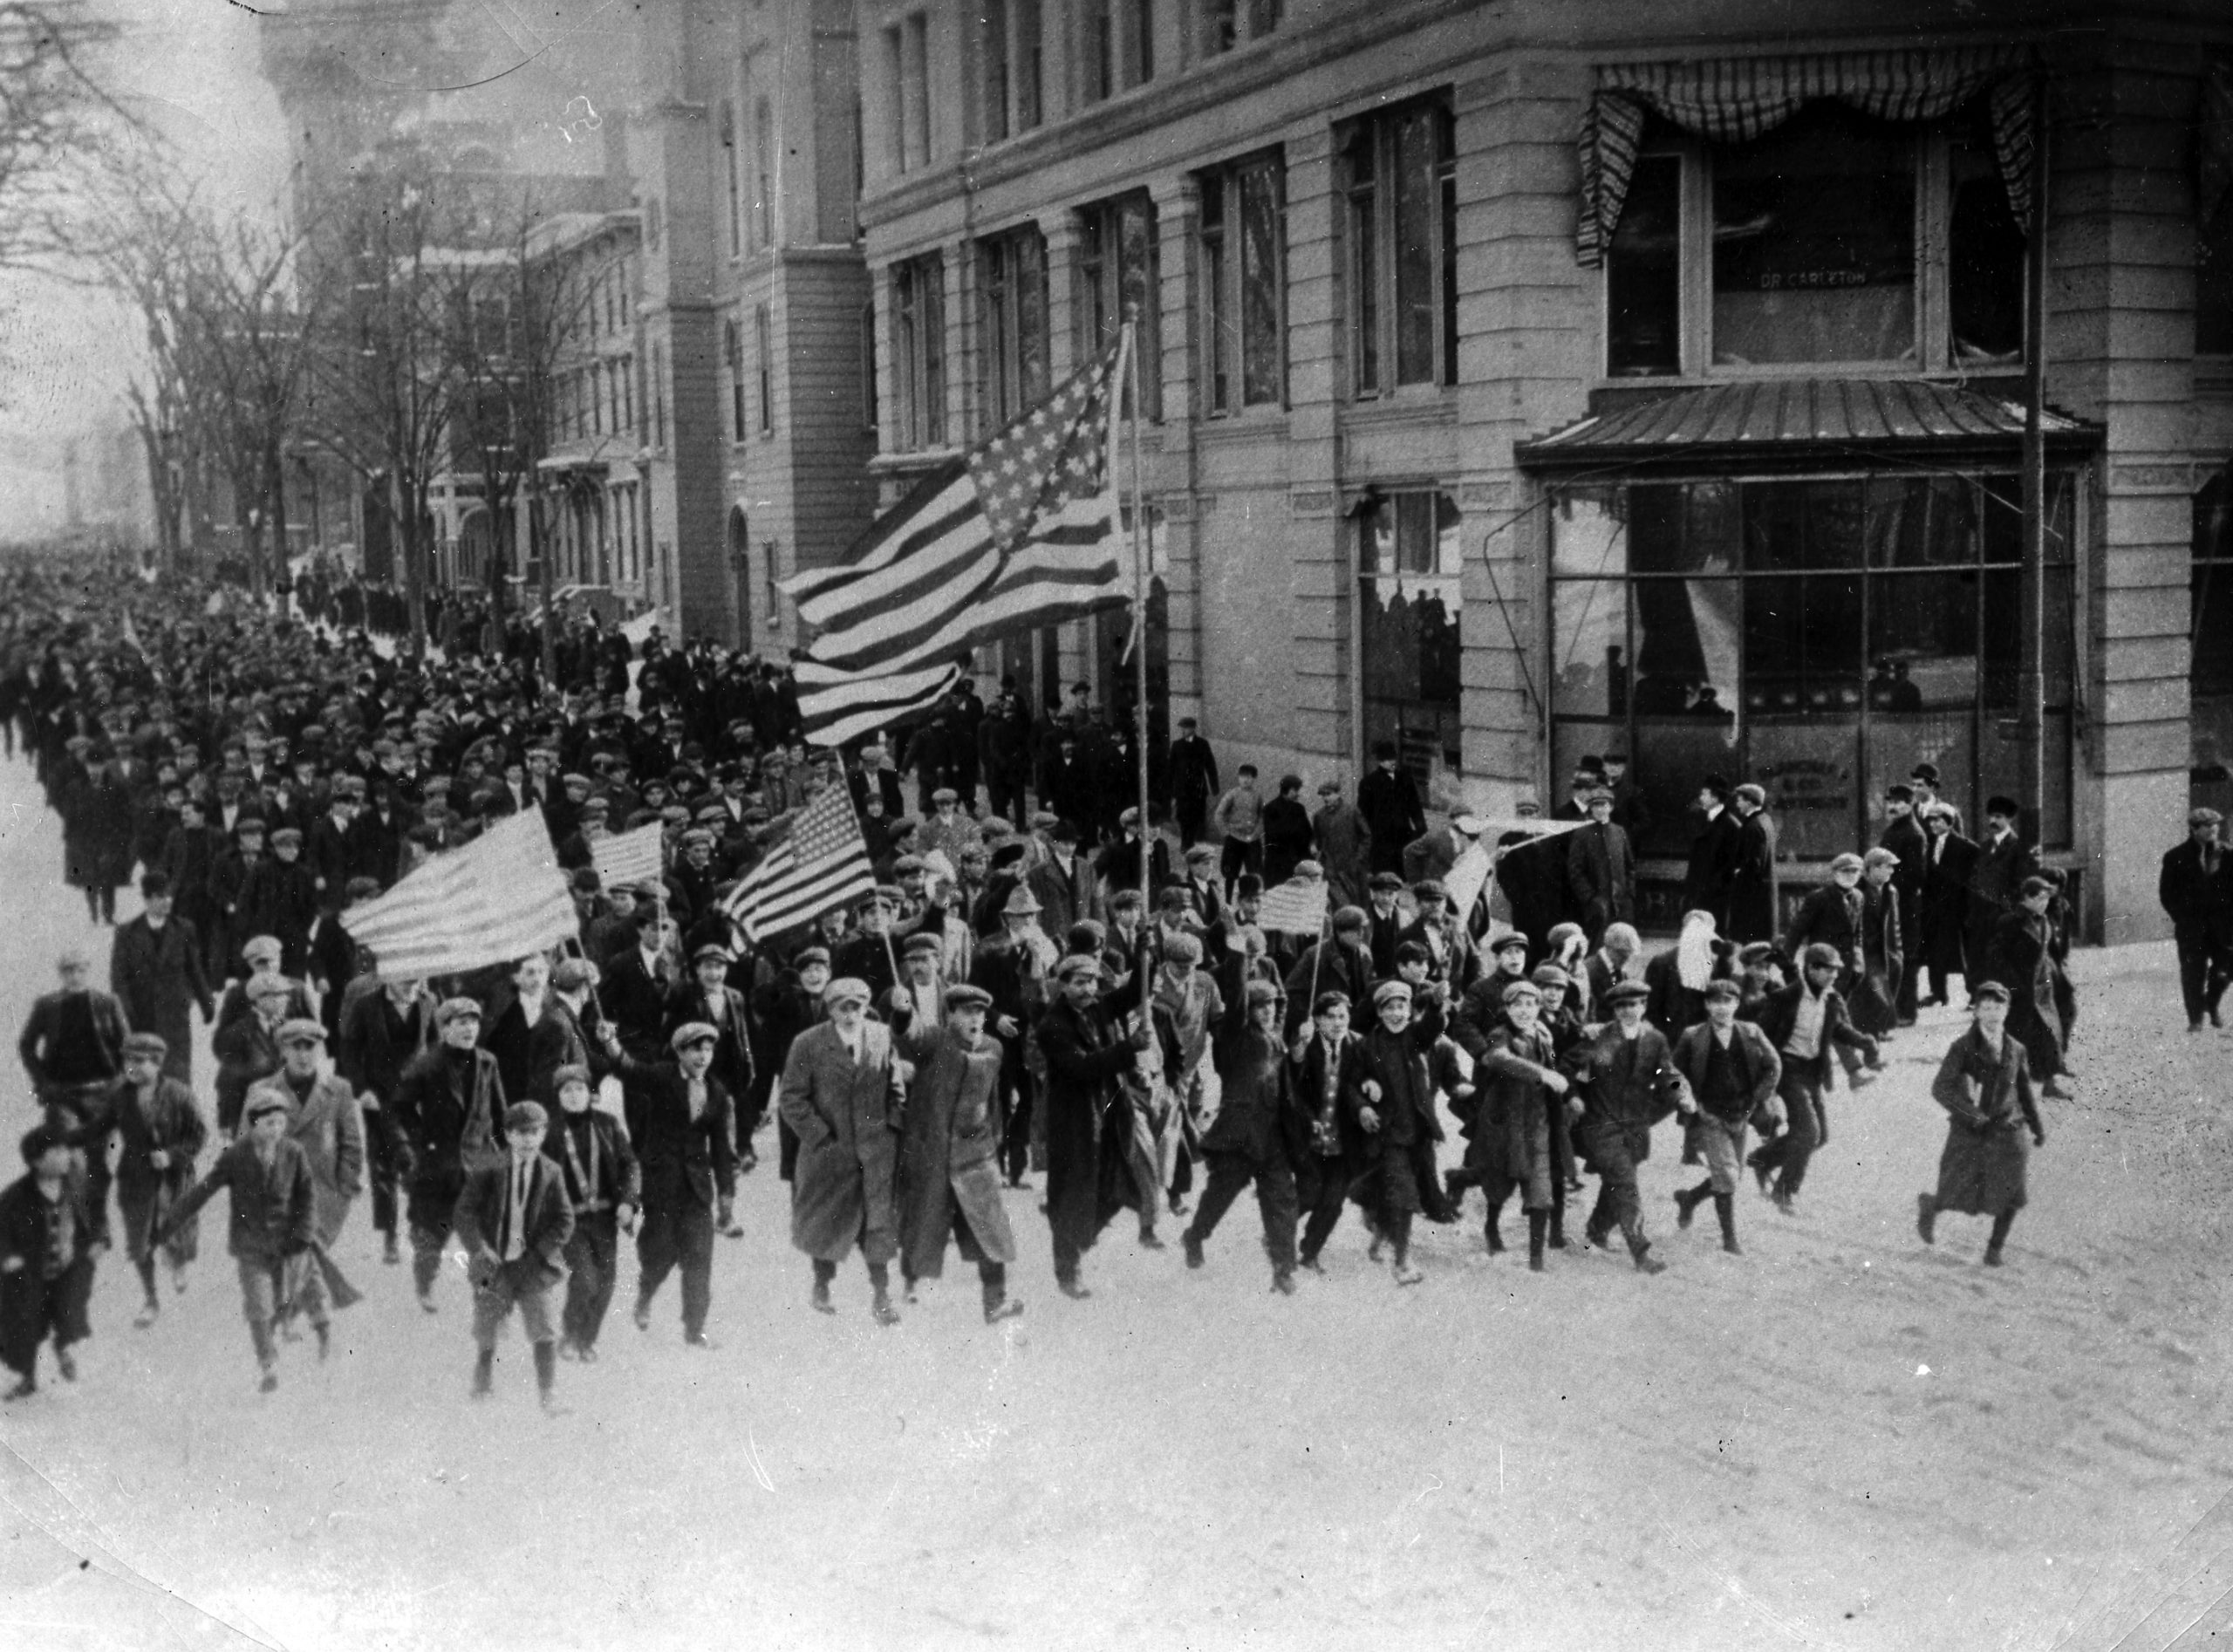 Strikers marching down the street in Lawrence, Massachusetts during the 1912 strike.